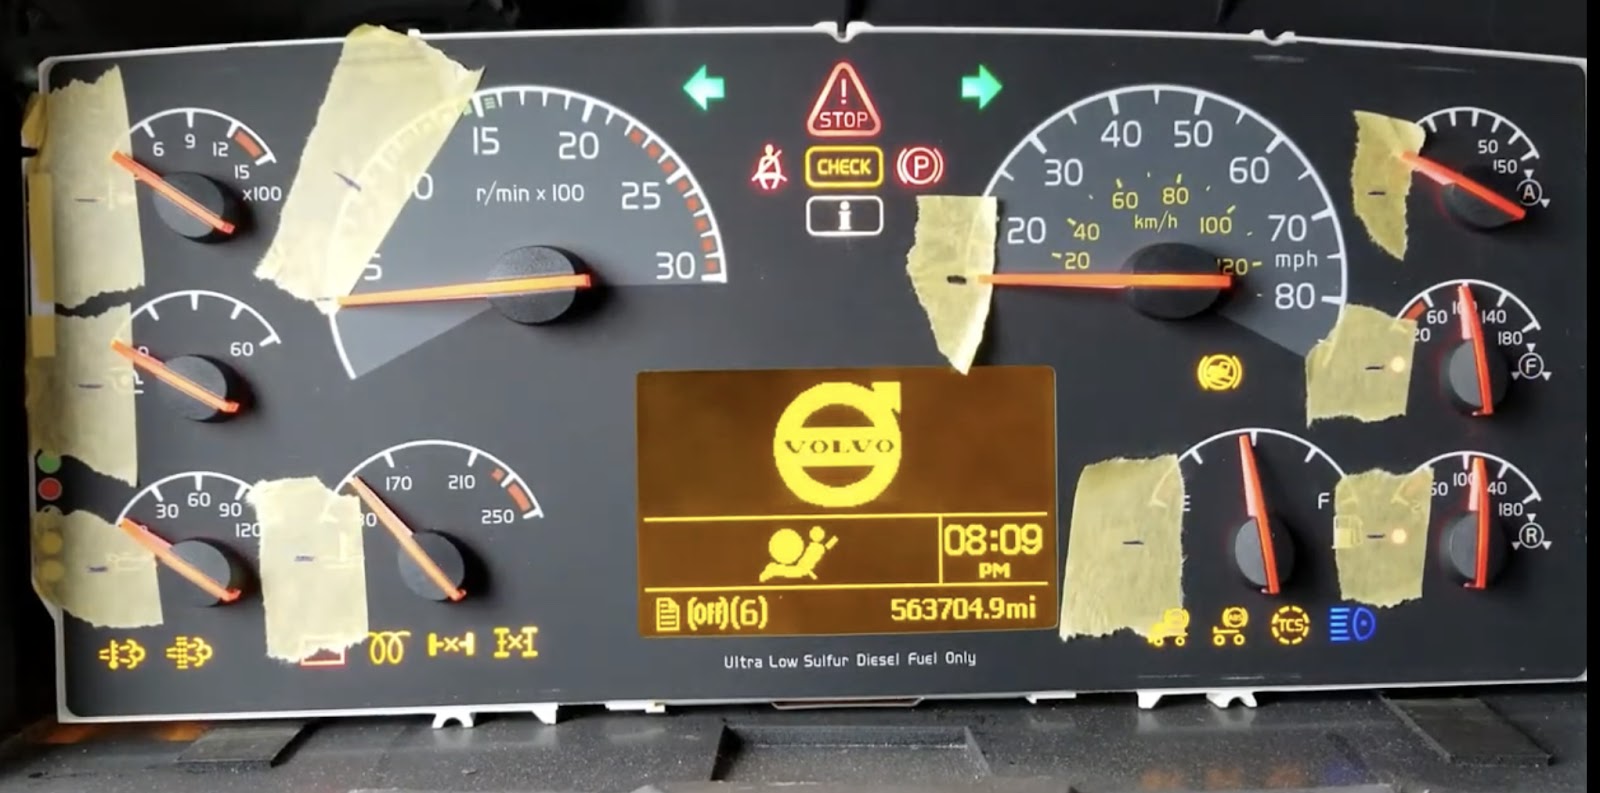 Volvo Truck Dashboard Gauges: The Meaning of Symbols